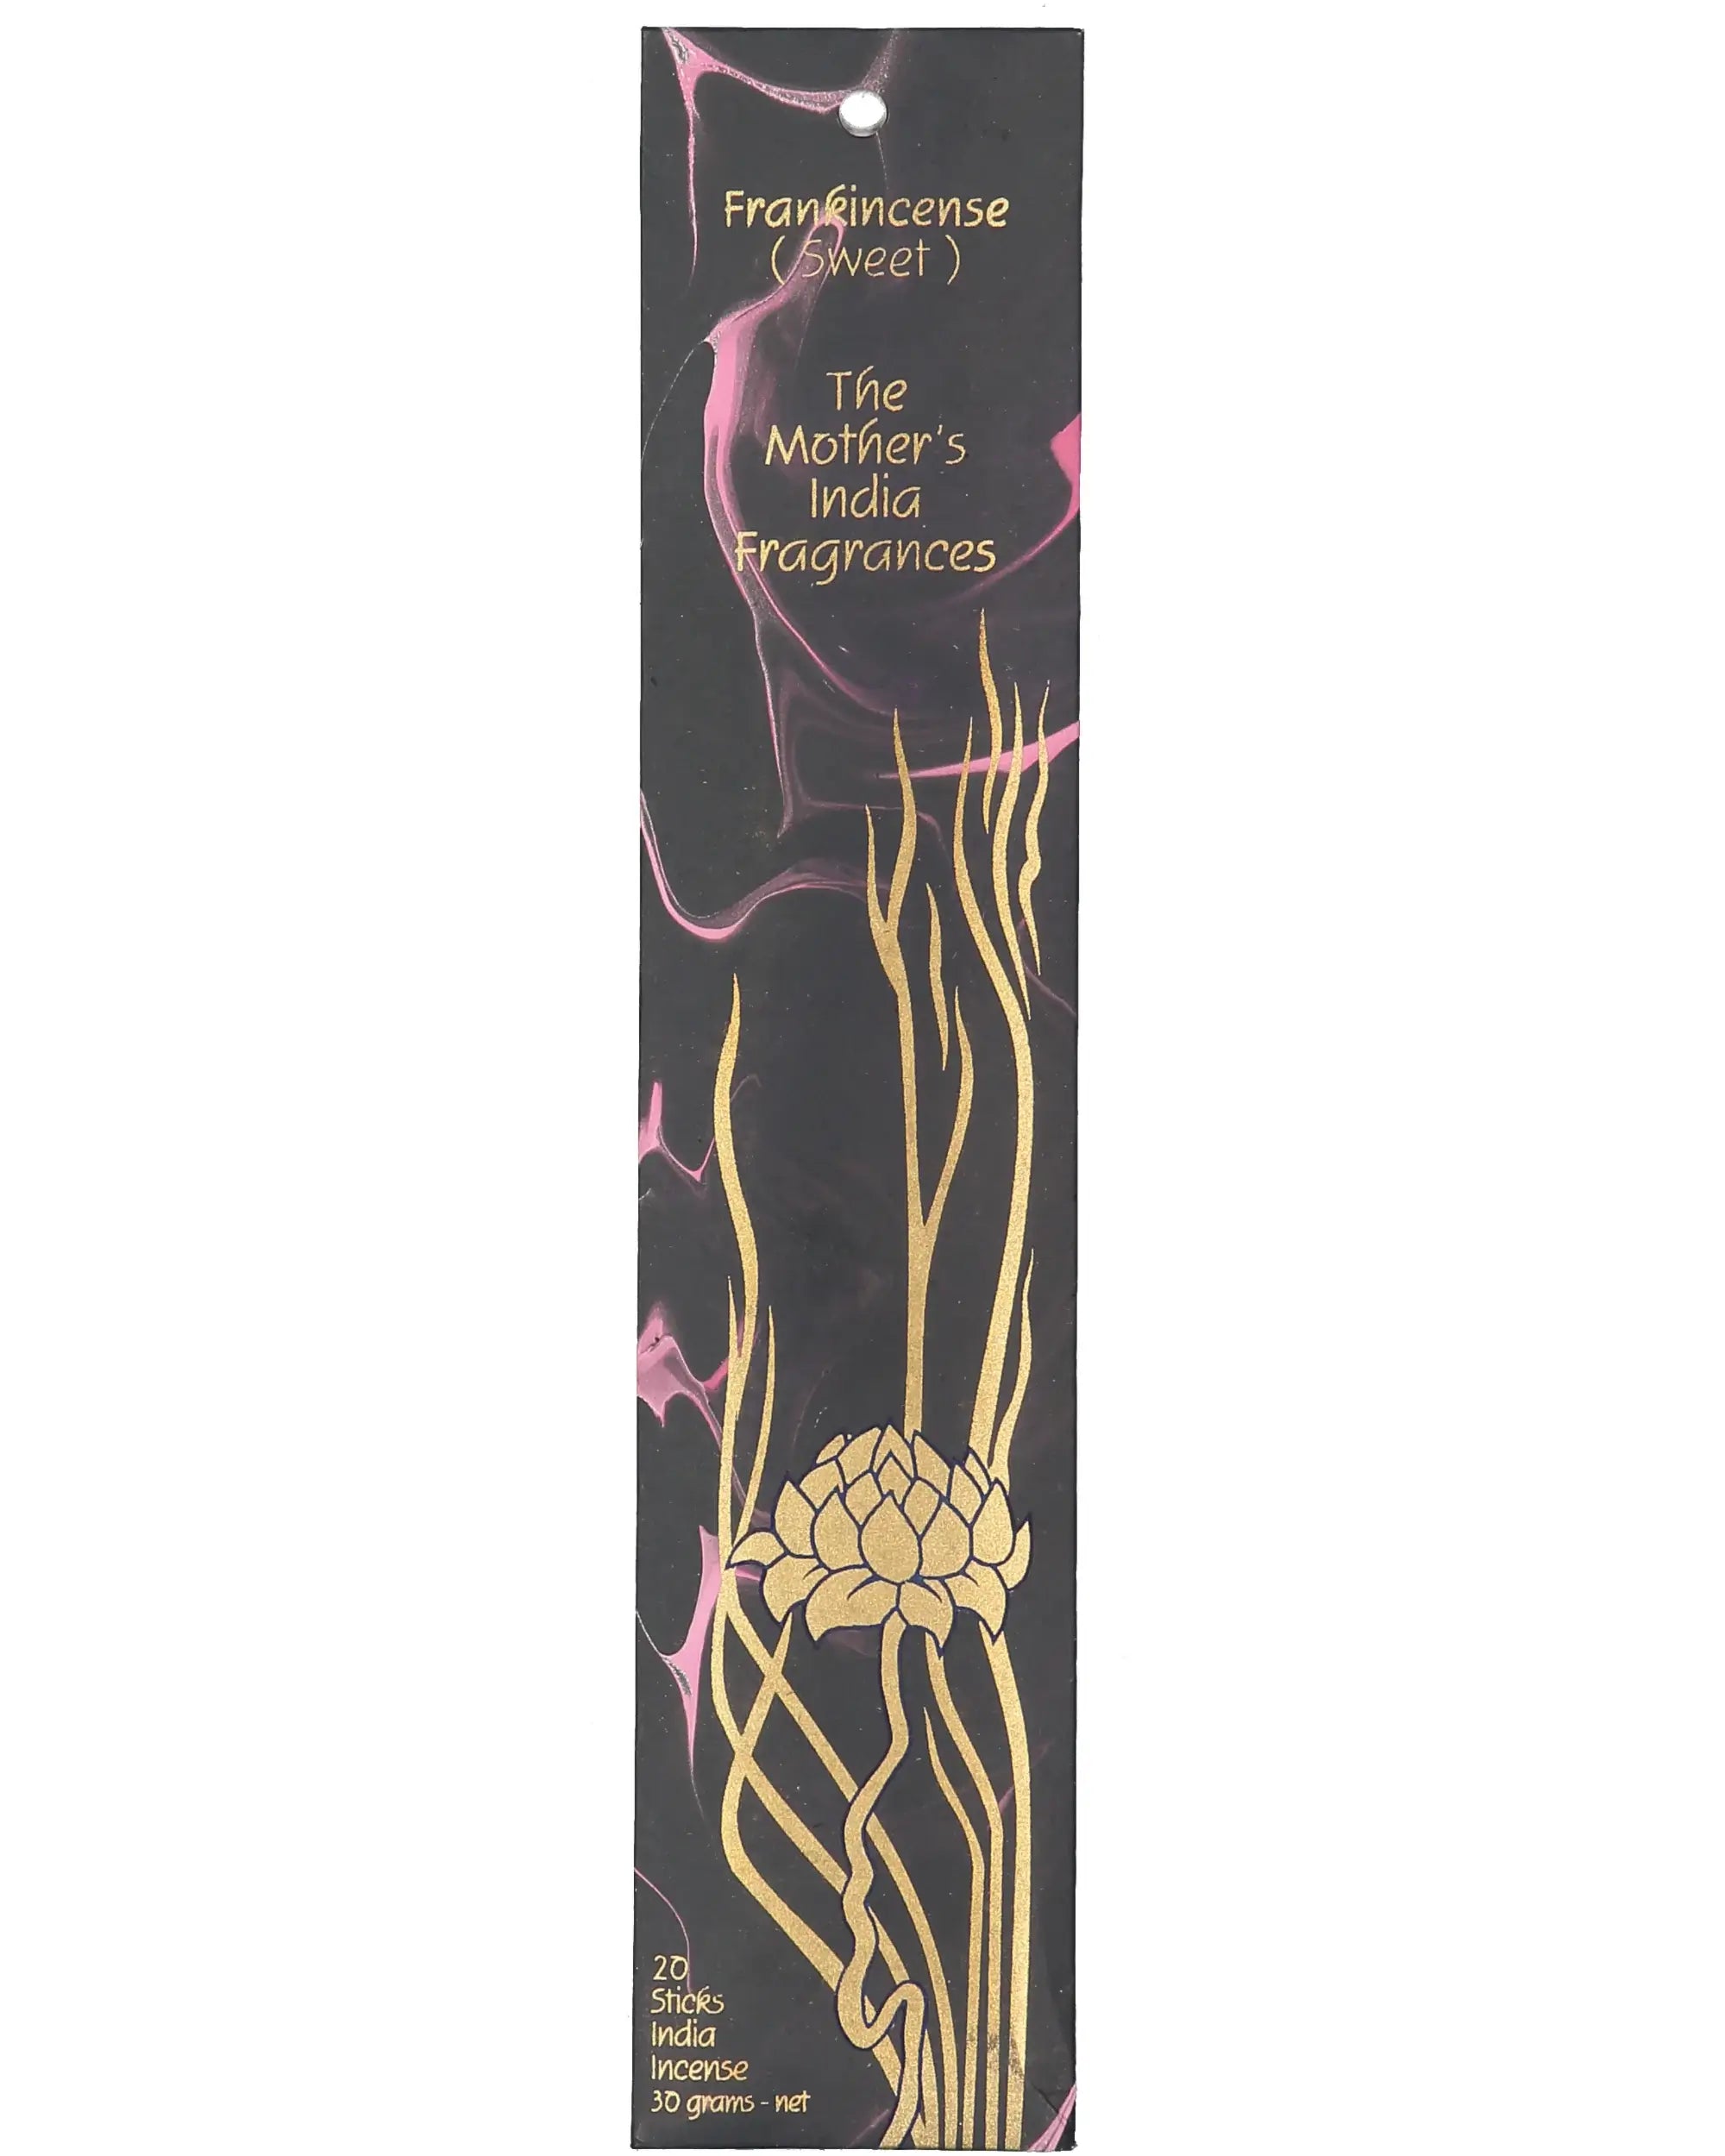 Frankincense (Sweet) Nagchampa Real Incense by The Mother's India Fragrances Tantrika Australia